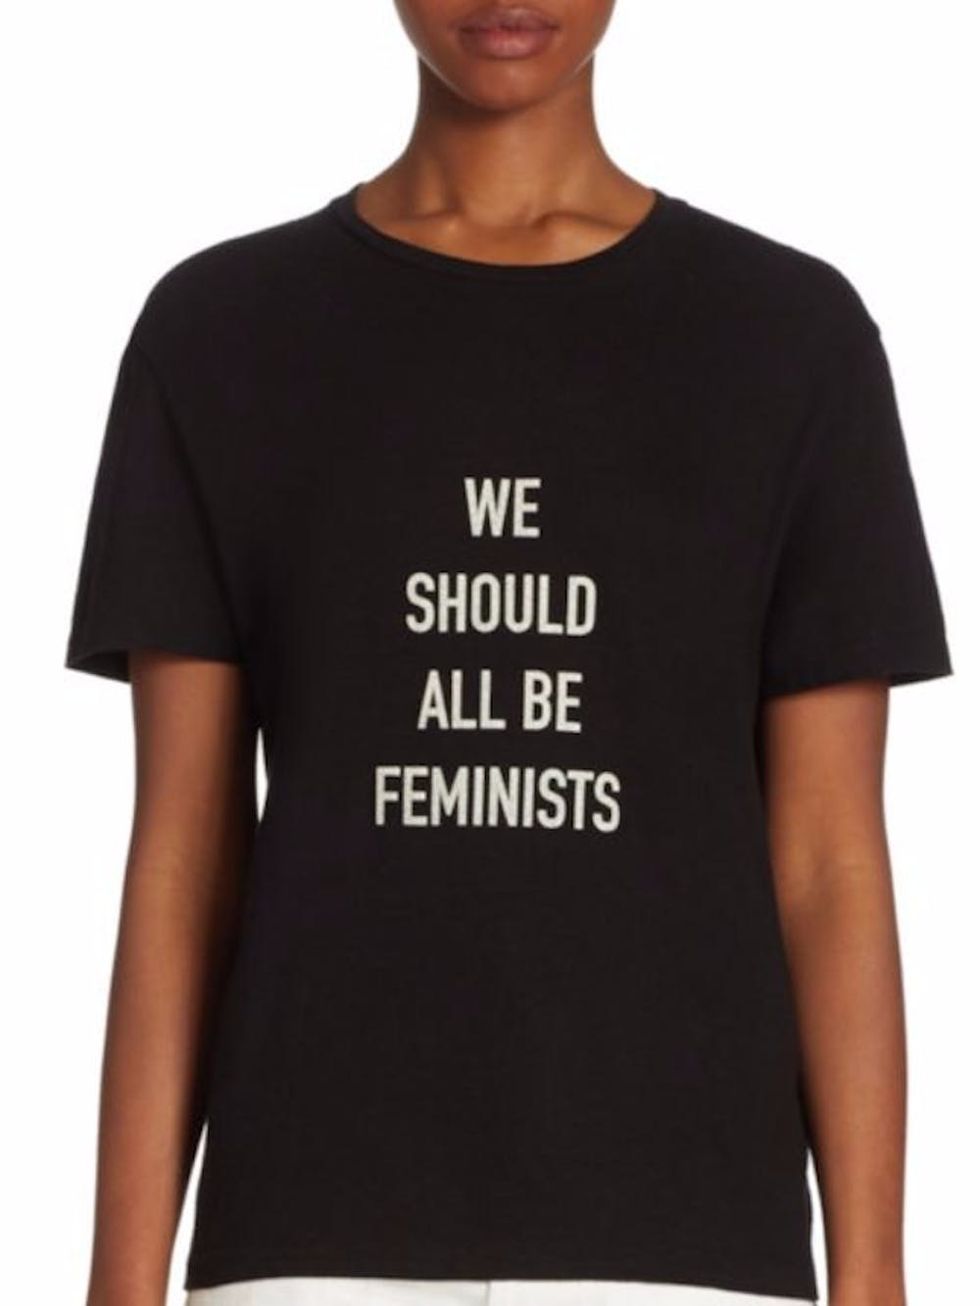 Dior’s “We Should All Be Feminists” Tee Is Available Now for a Mere